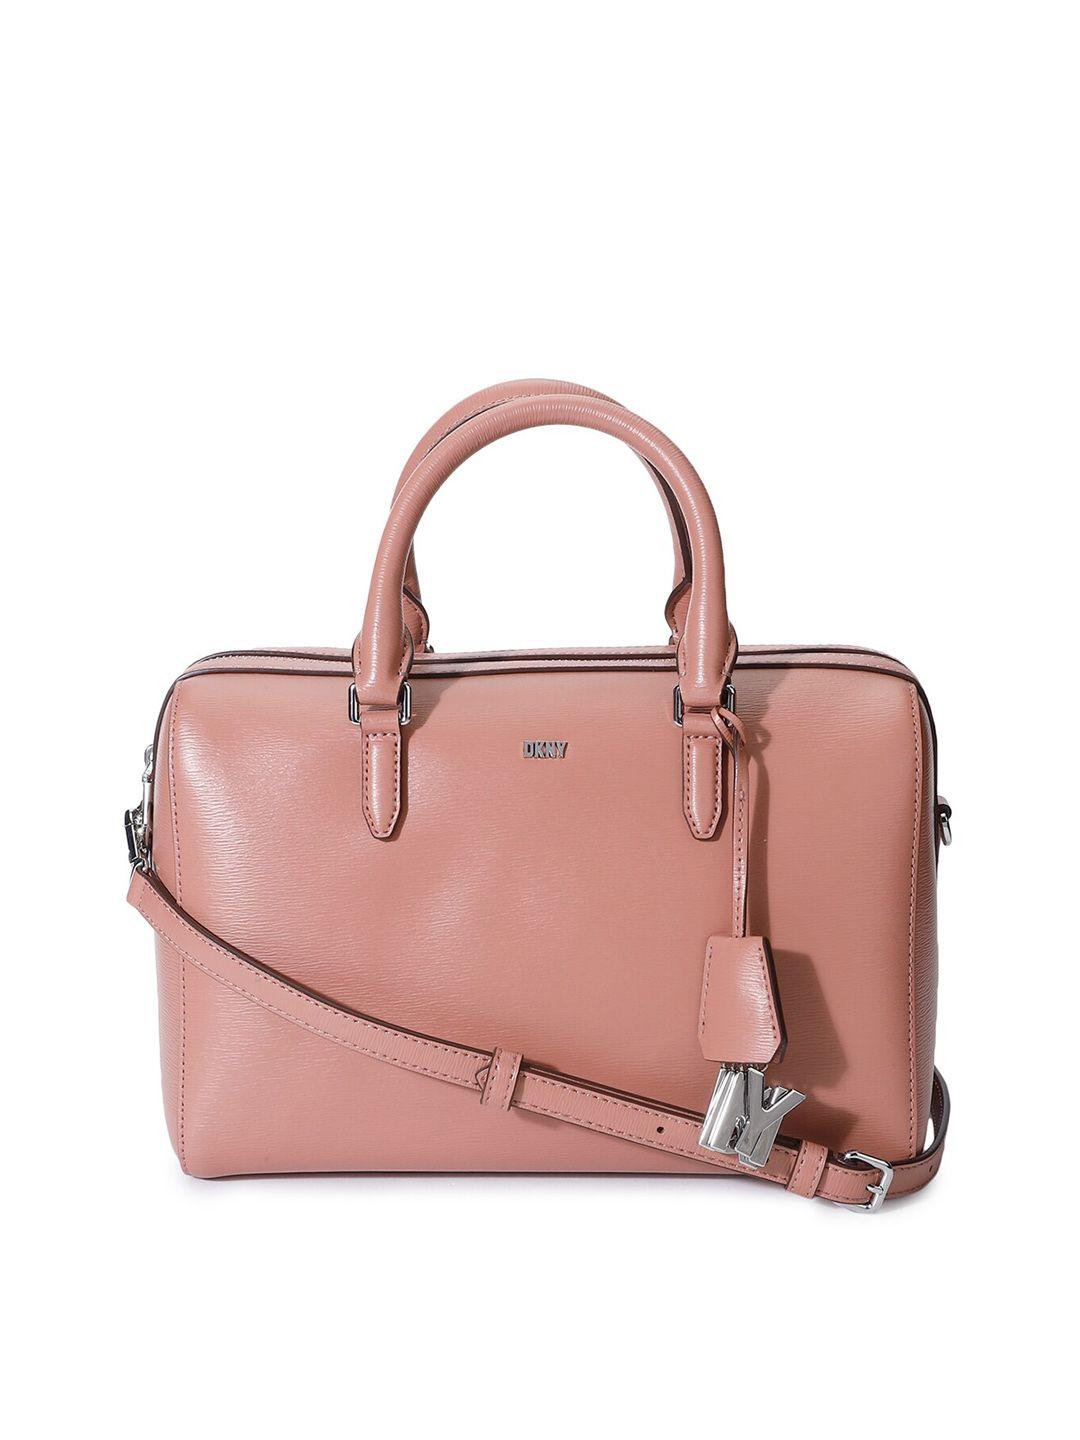 dkny leather structured handheld bag